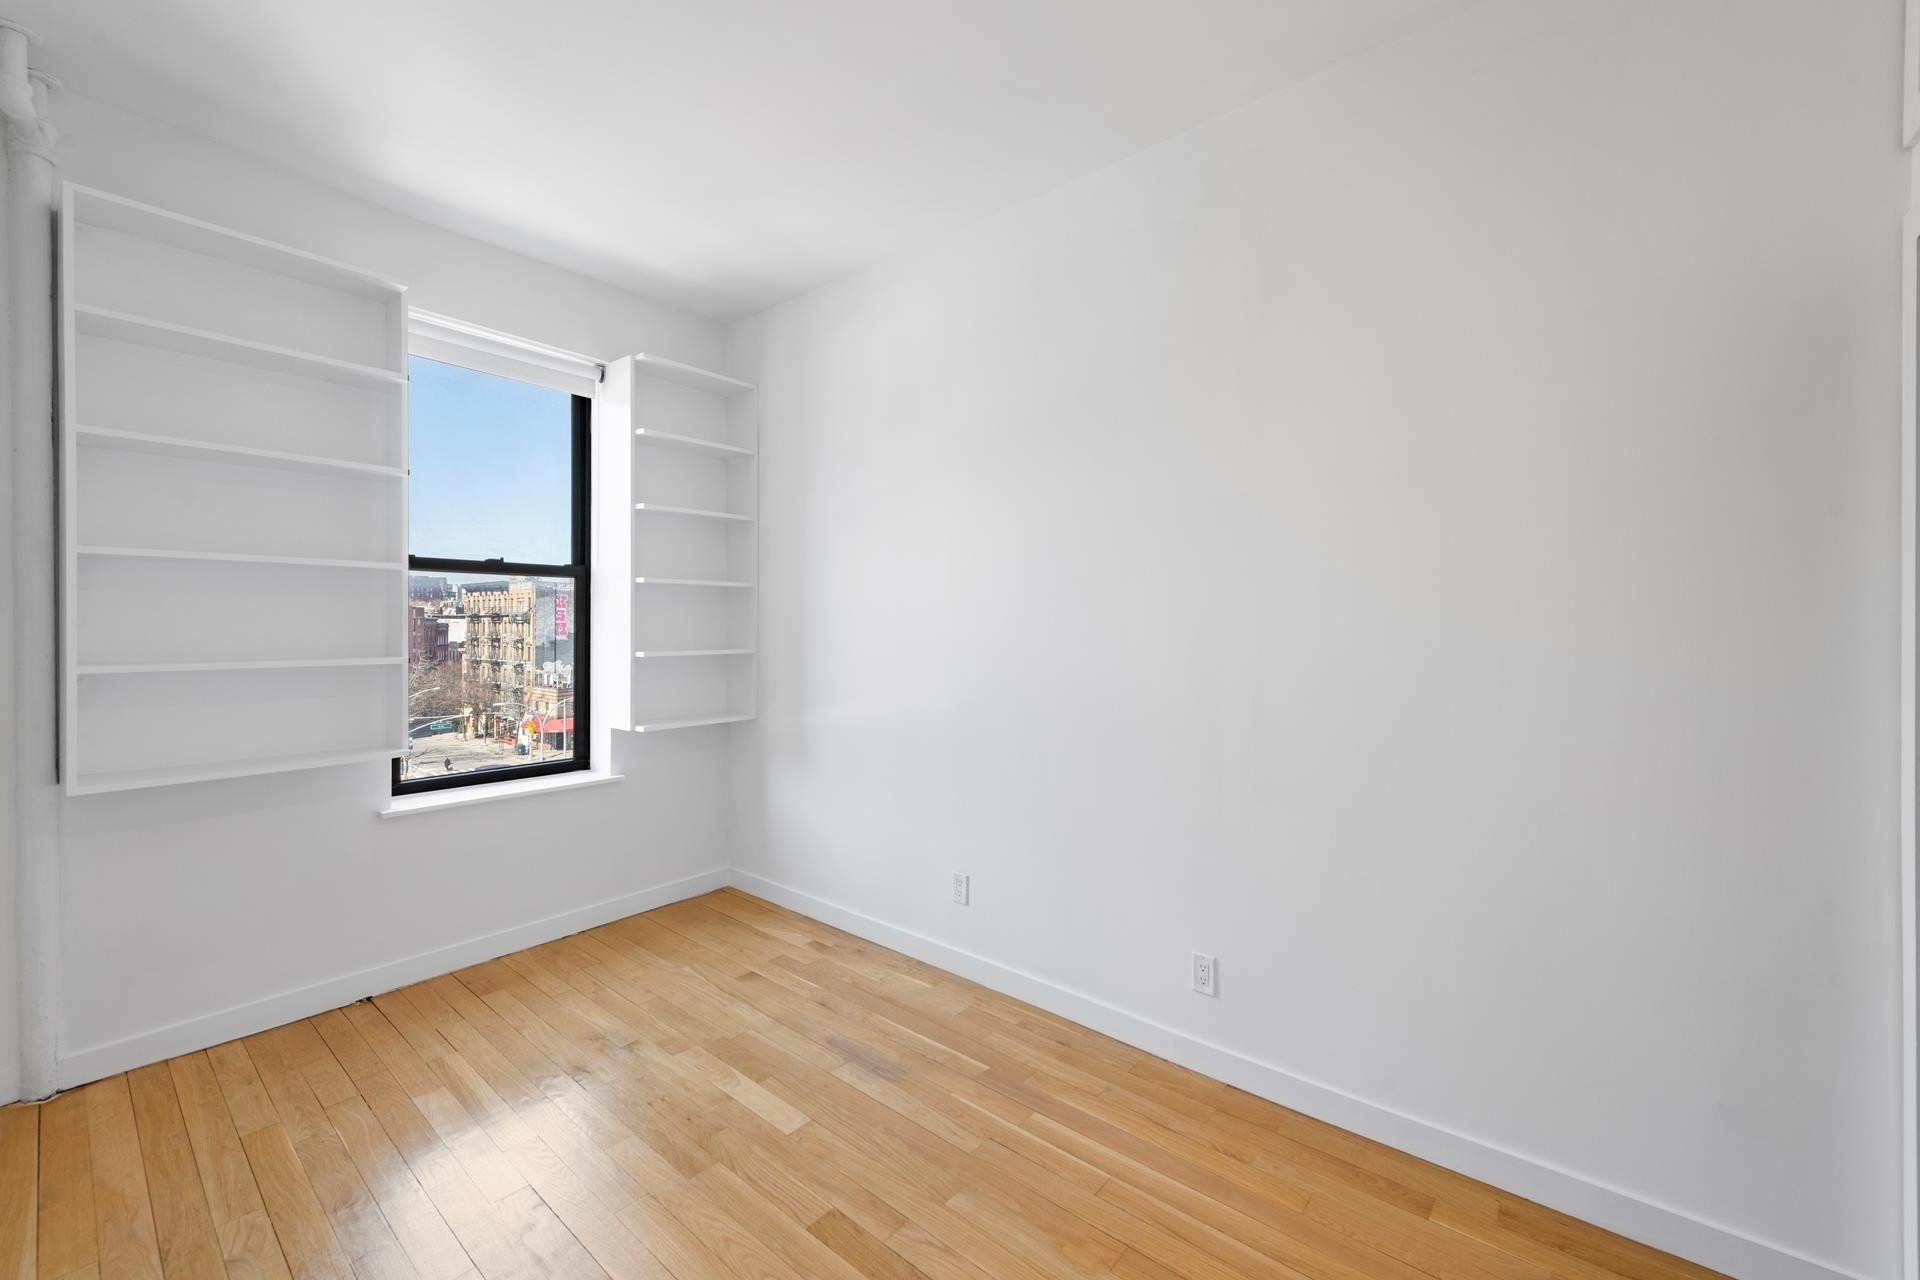 4. Co-op Properties for Sale at 64 MACDOUGAL ST, 15 SoHo, New York, NY 10012